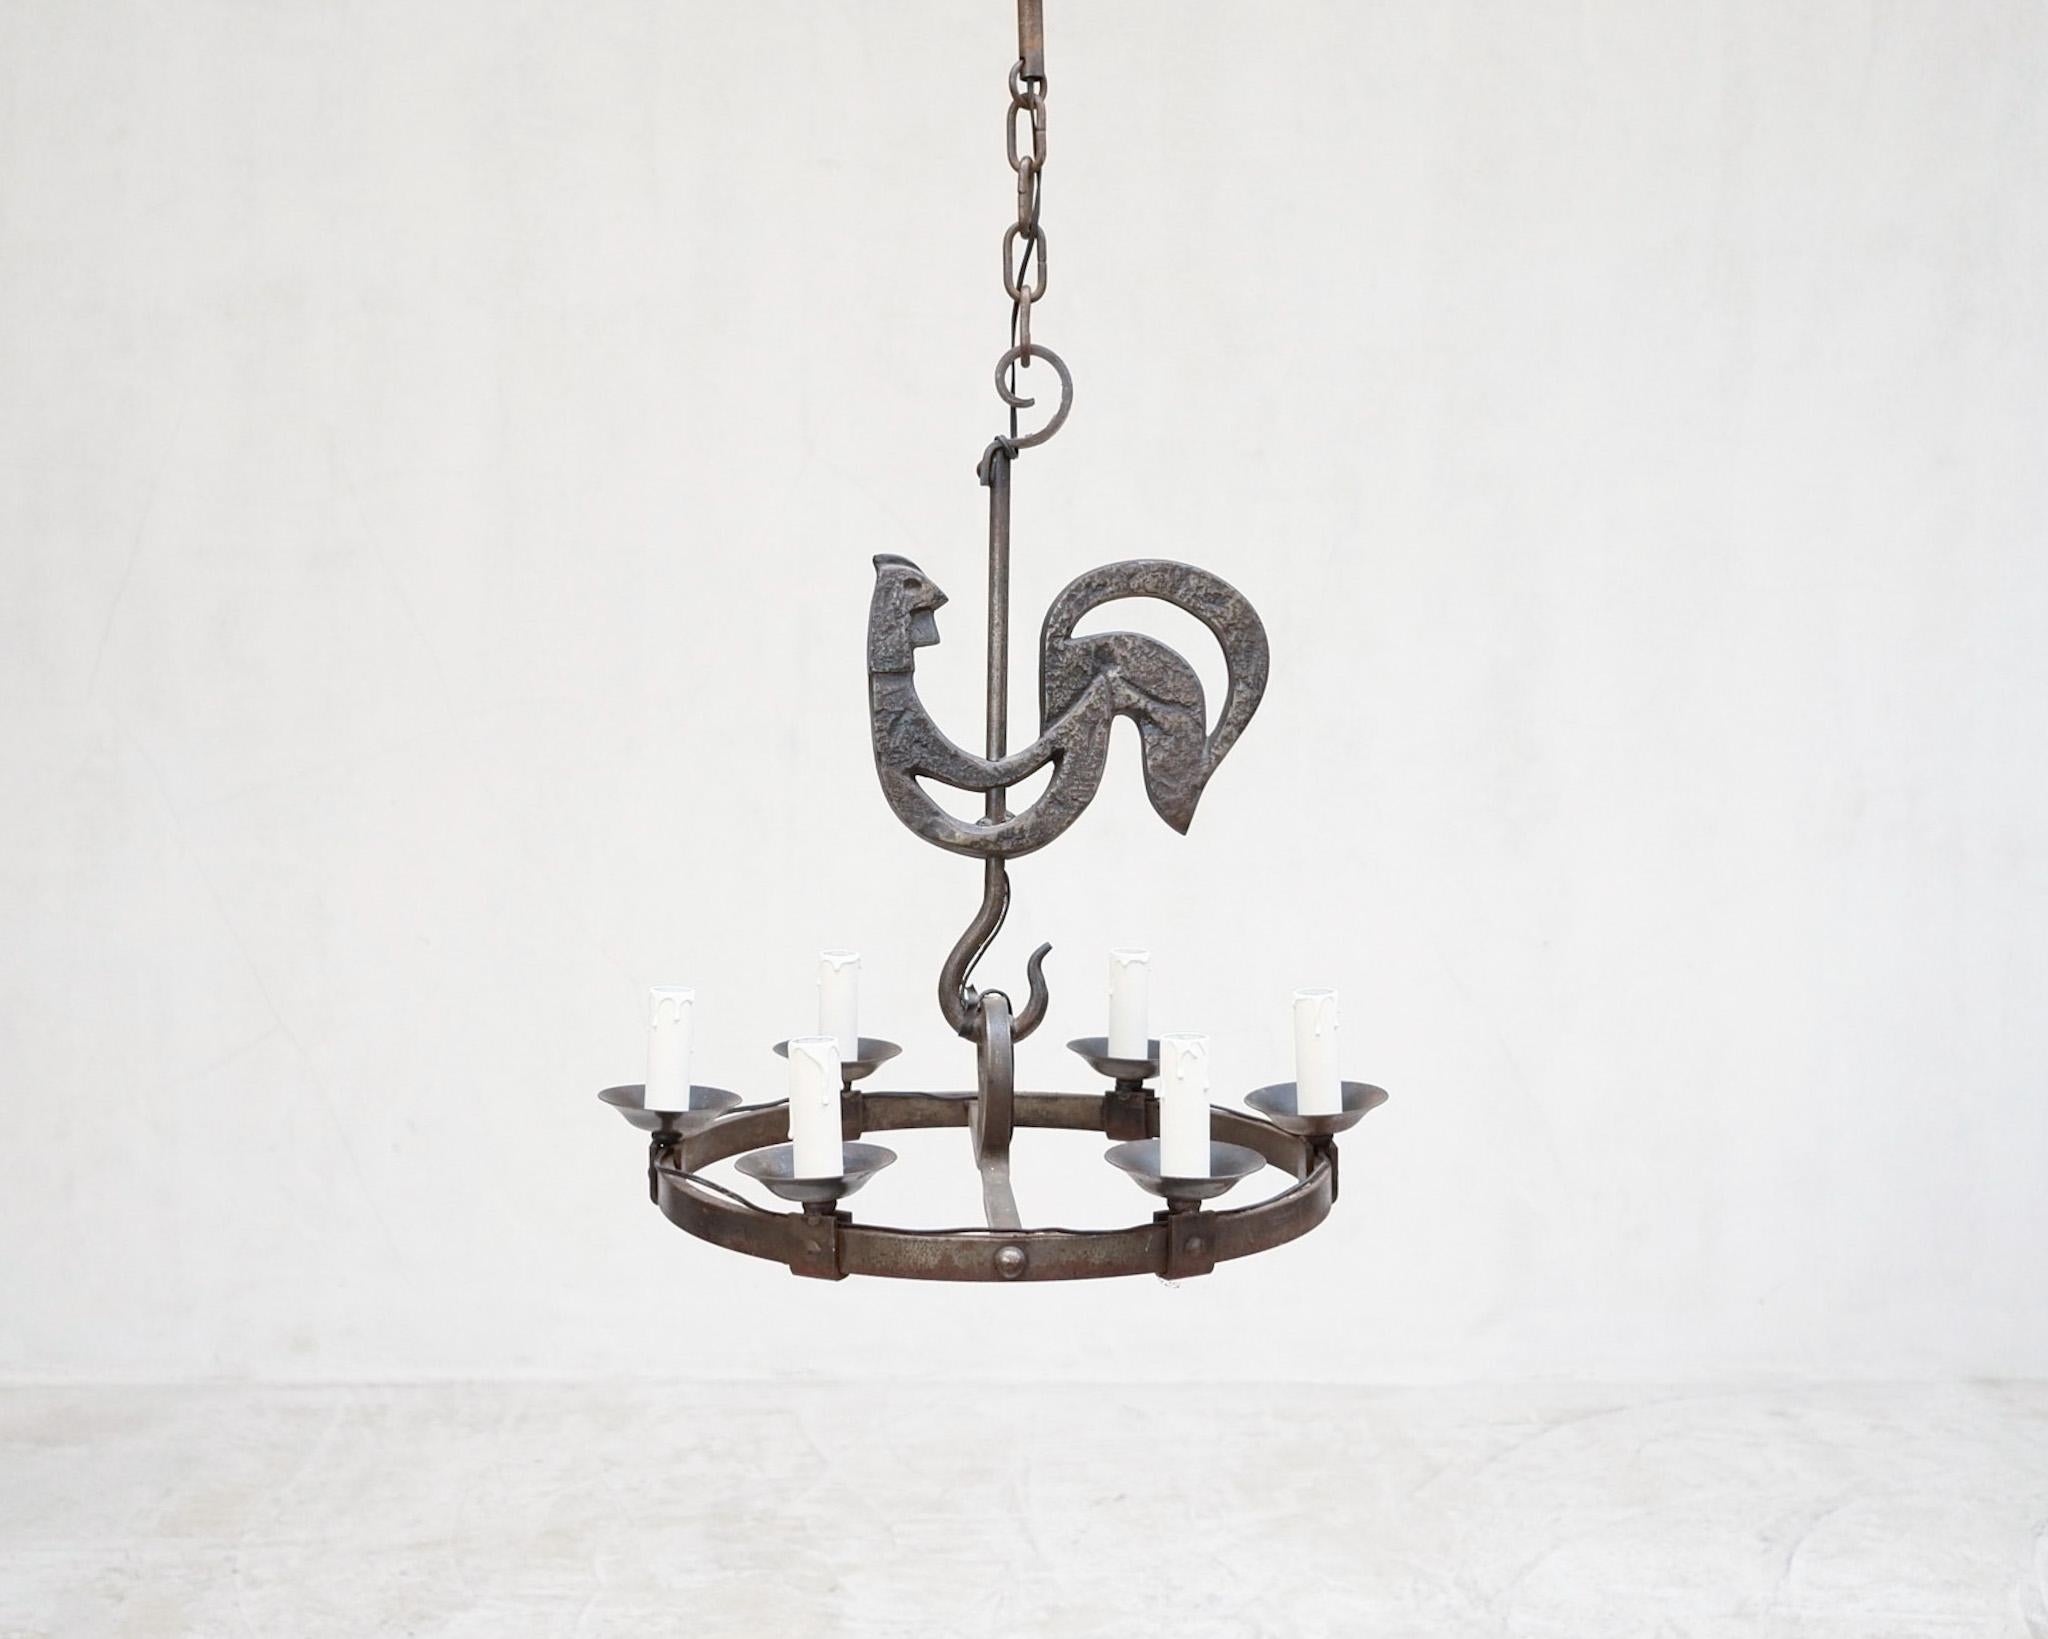 Striking chandelier by Jean Touret for Atelier Marolles.

Made of Wrought by the artisans of Marolles, France C.1950 

Fantastic quality.

-

We offer free shipping to the USA/Canada through Fedex with this item.